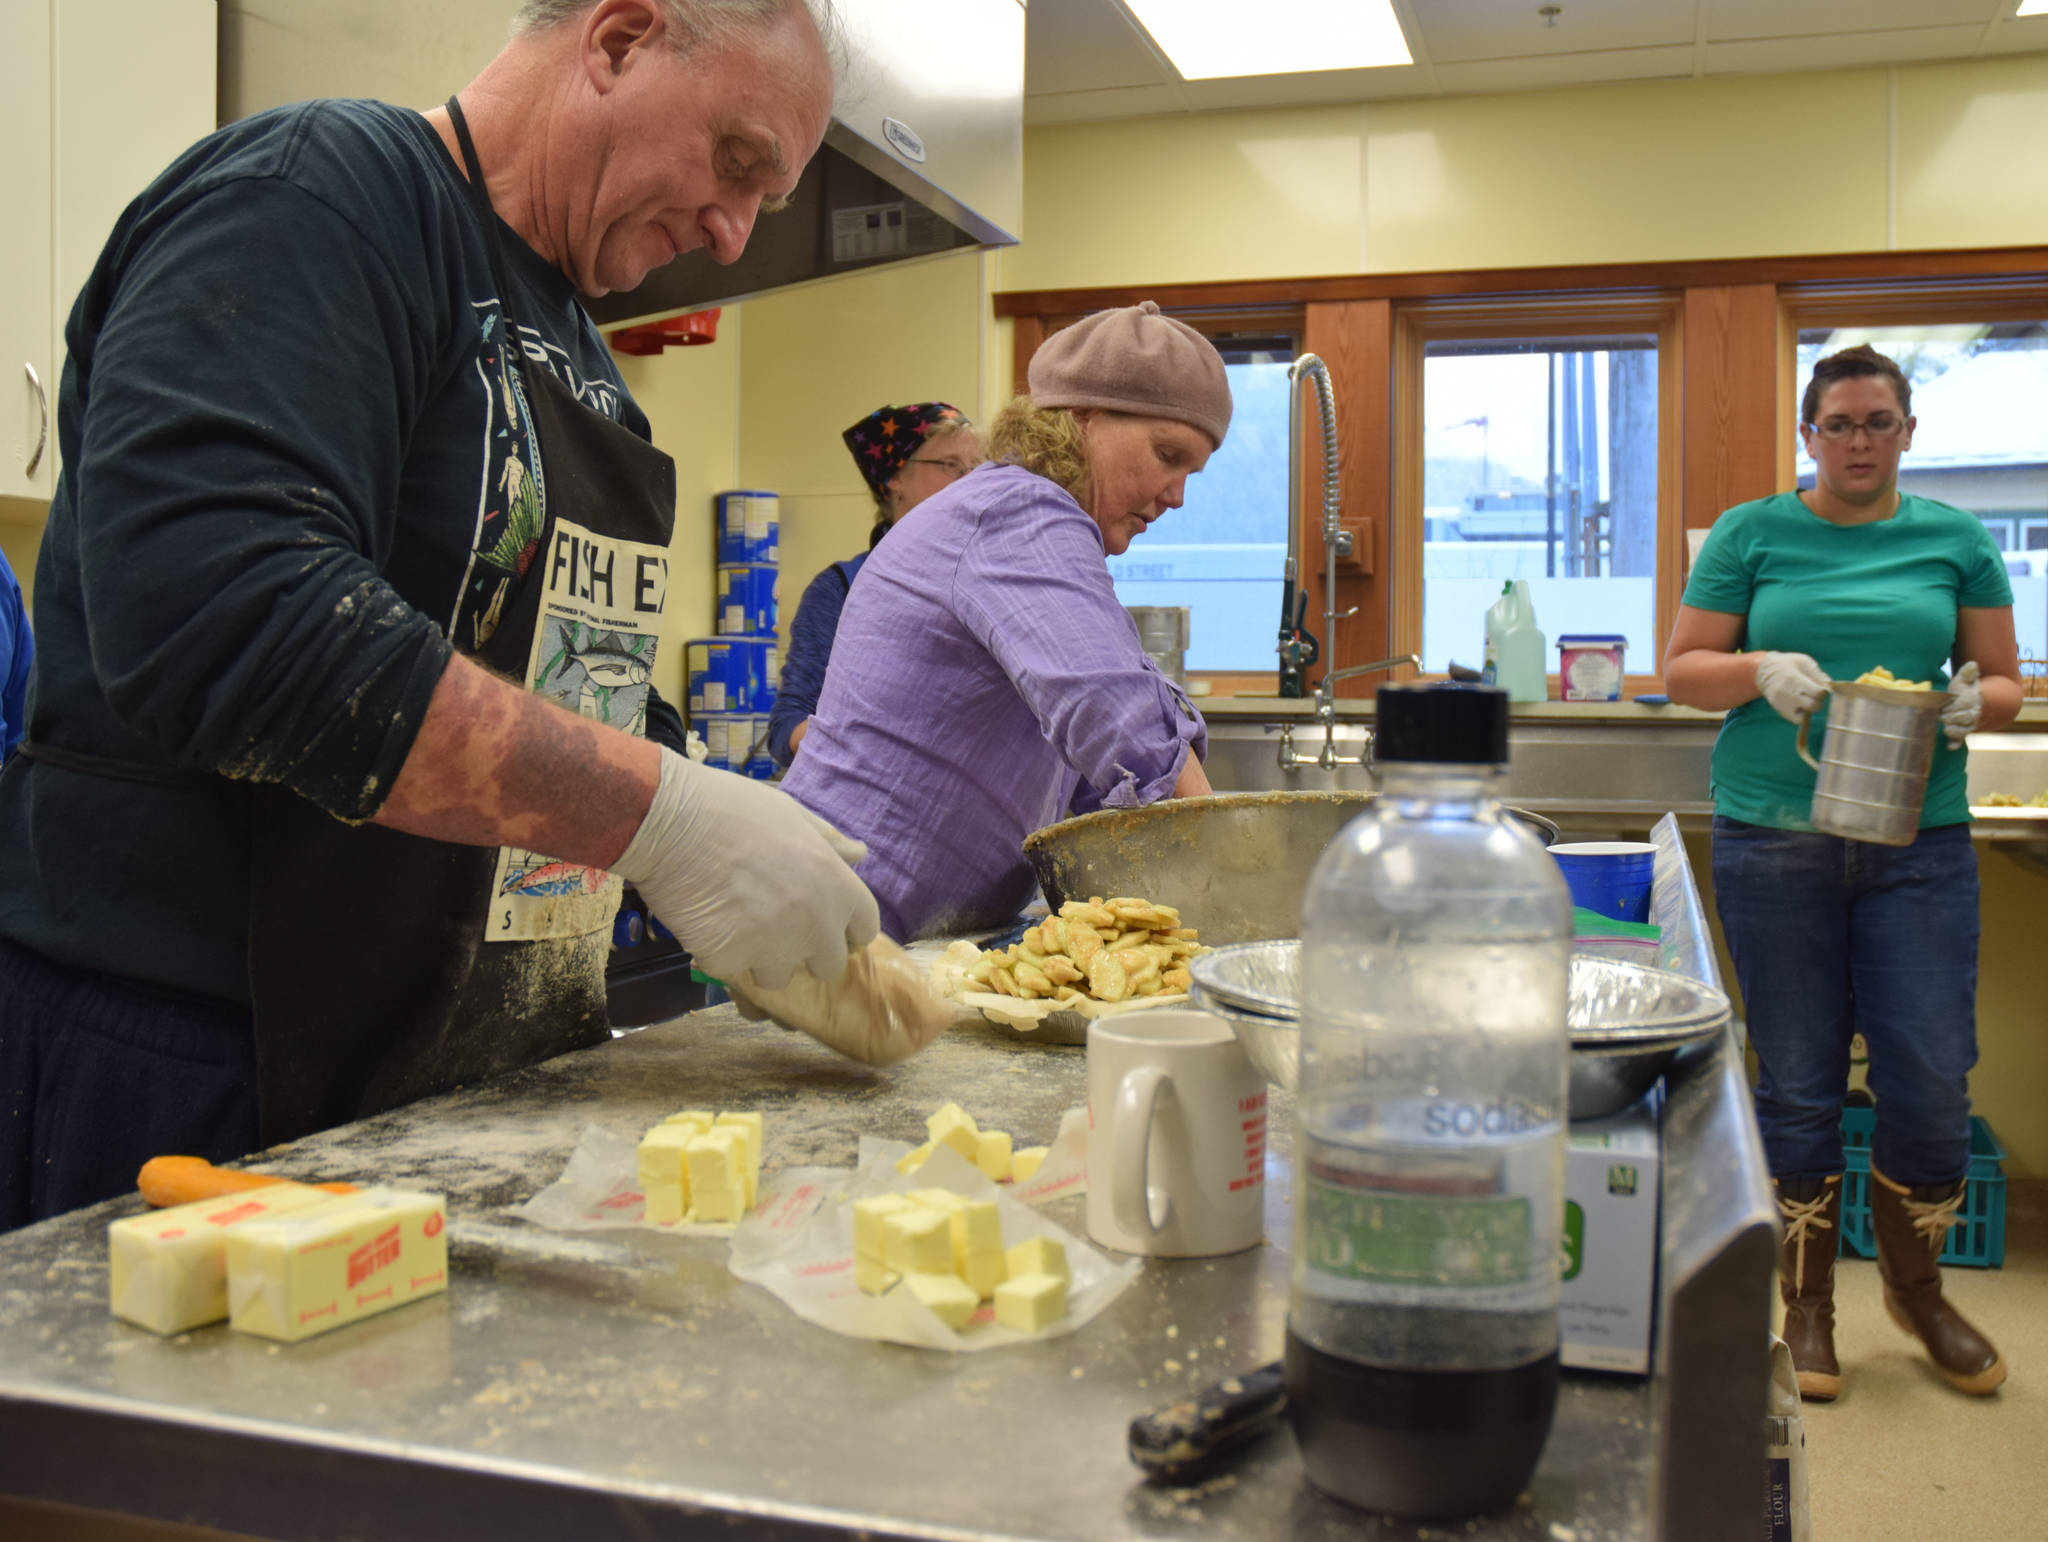 Father Gordon Blue, left, and Mary Alice McKeen, middle, prepare pie filling at a the Holy Trinity Church on Saturday. Blue and McKeen helped with the church’s “pie-a-thon” charity event, where they made 300 pies for sale and for donation in preparation for Thanksgiving Day. (Kevin Gullufsen | Juneau Empire)